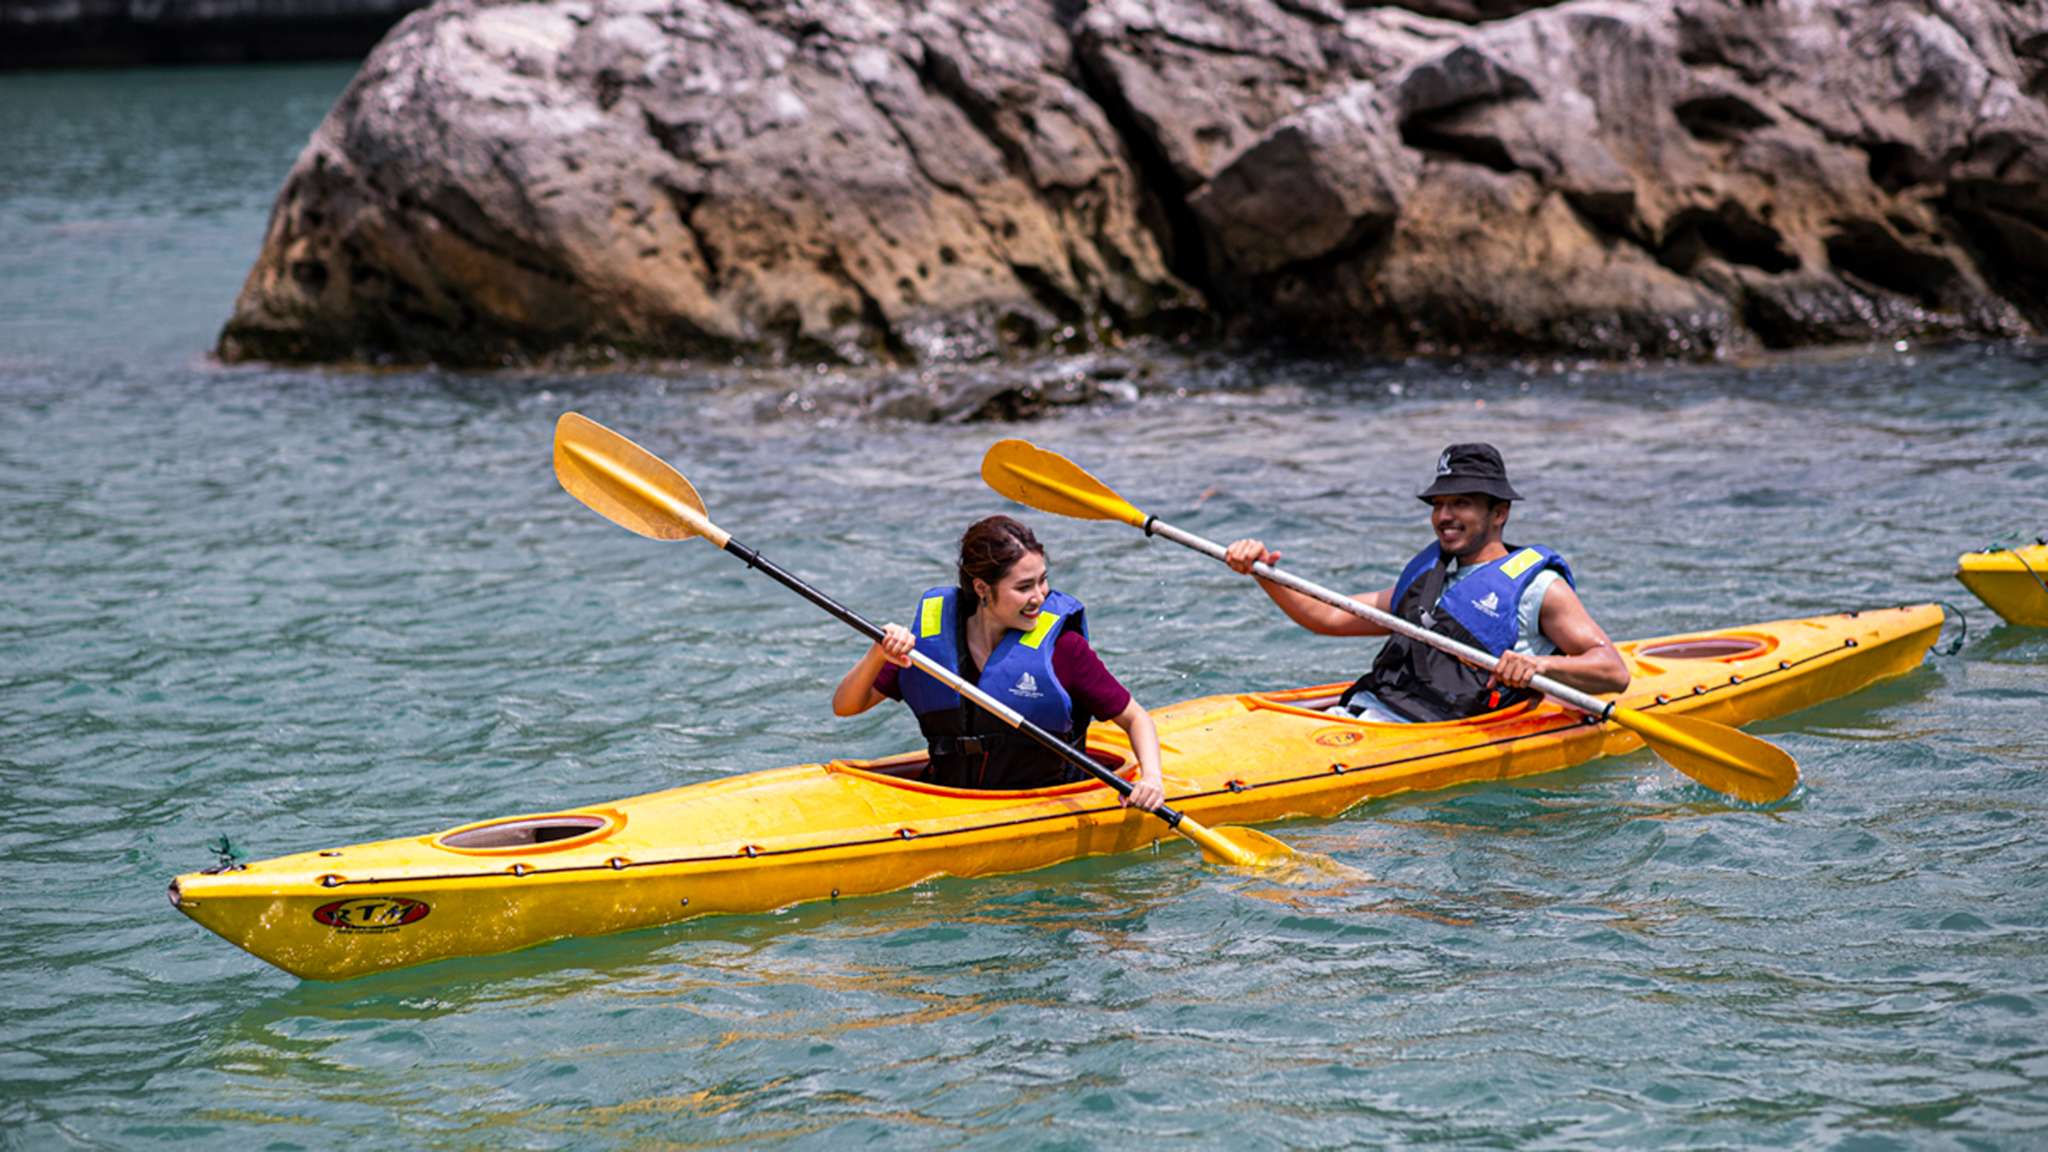 Experience Kayaking to explore the caves